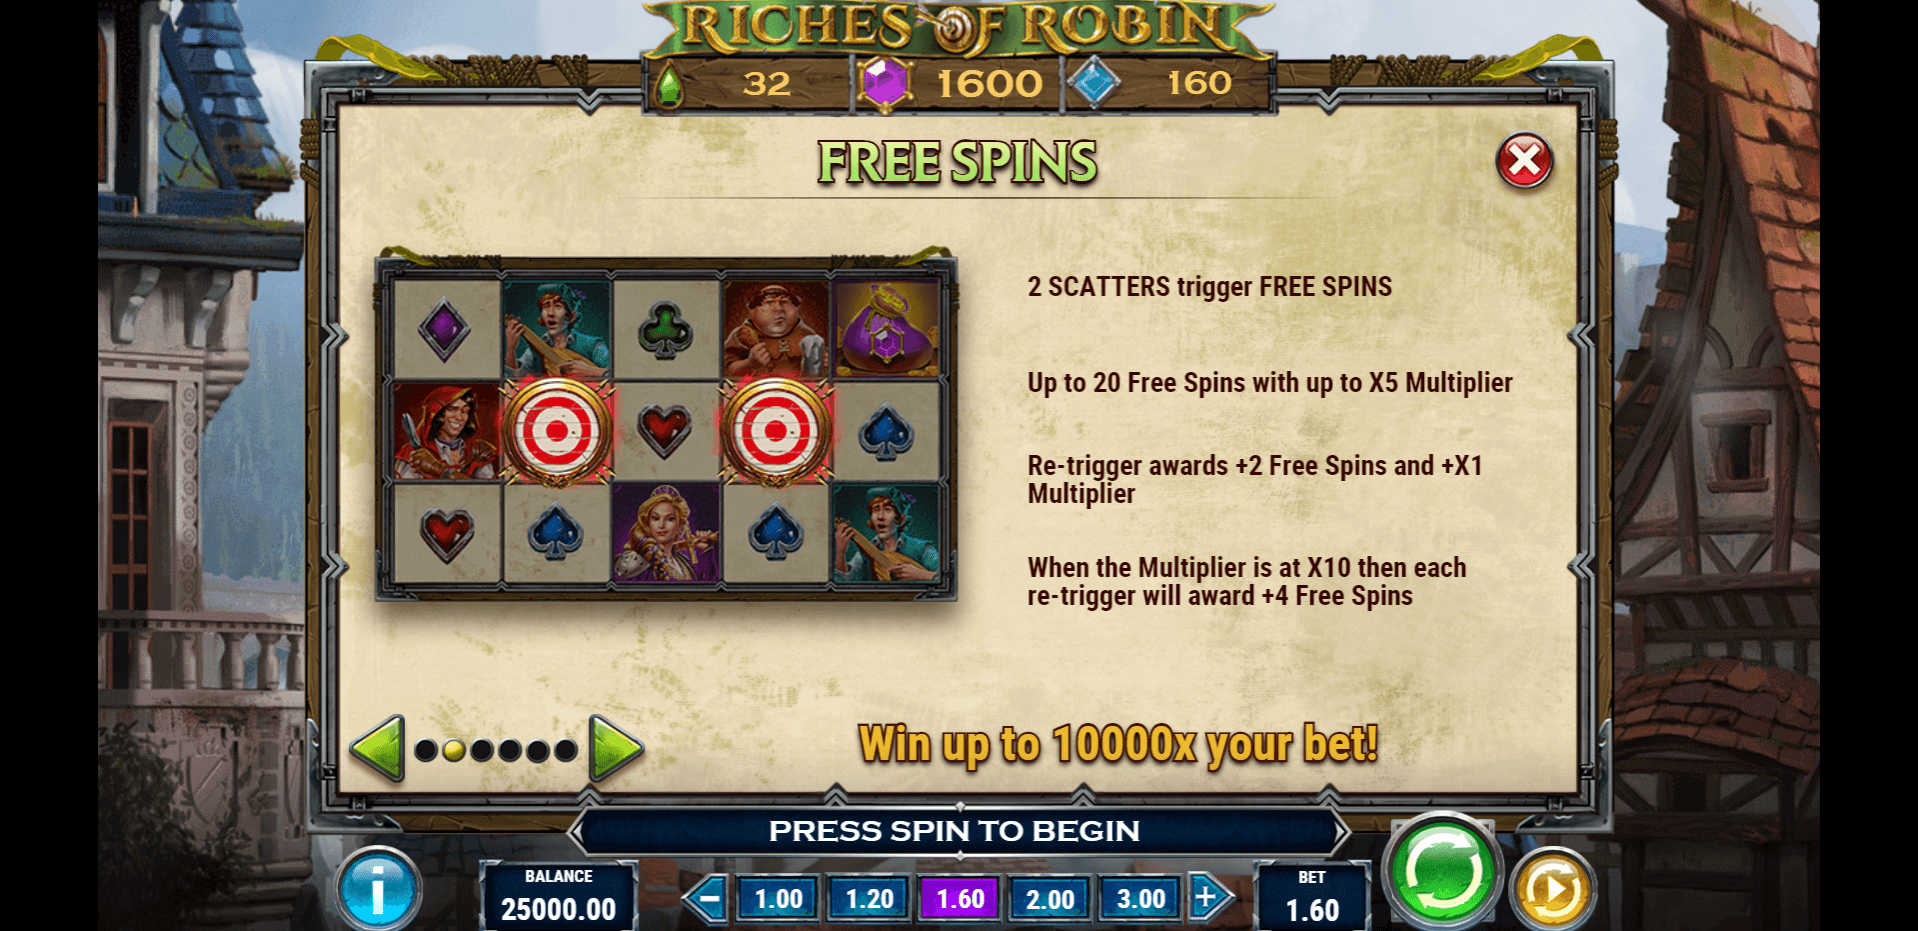 riches of robin slot machine detail image 1